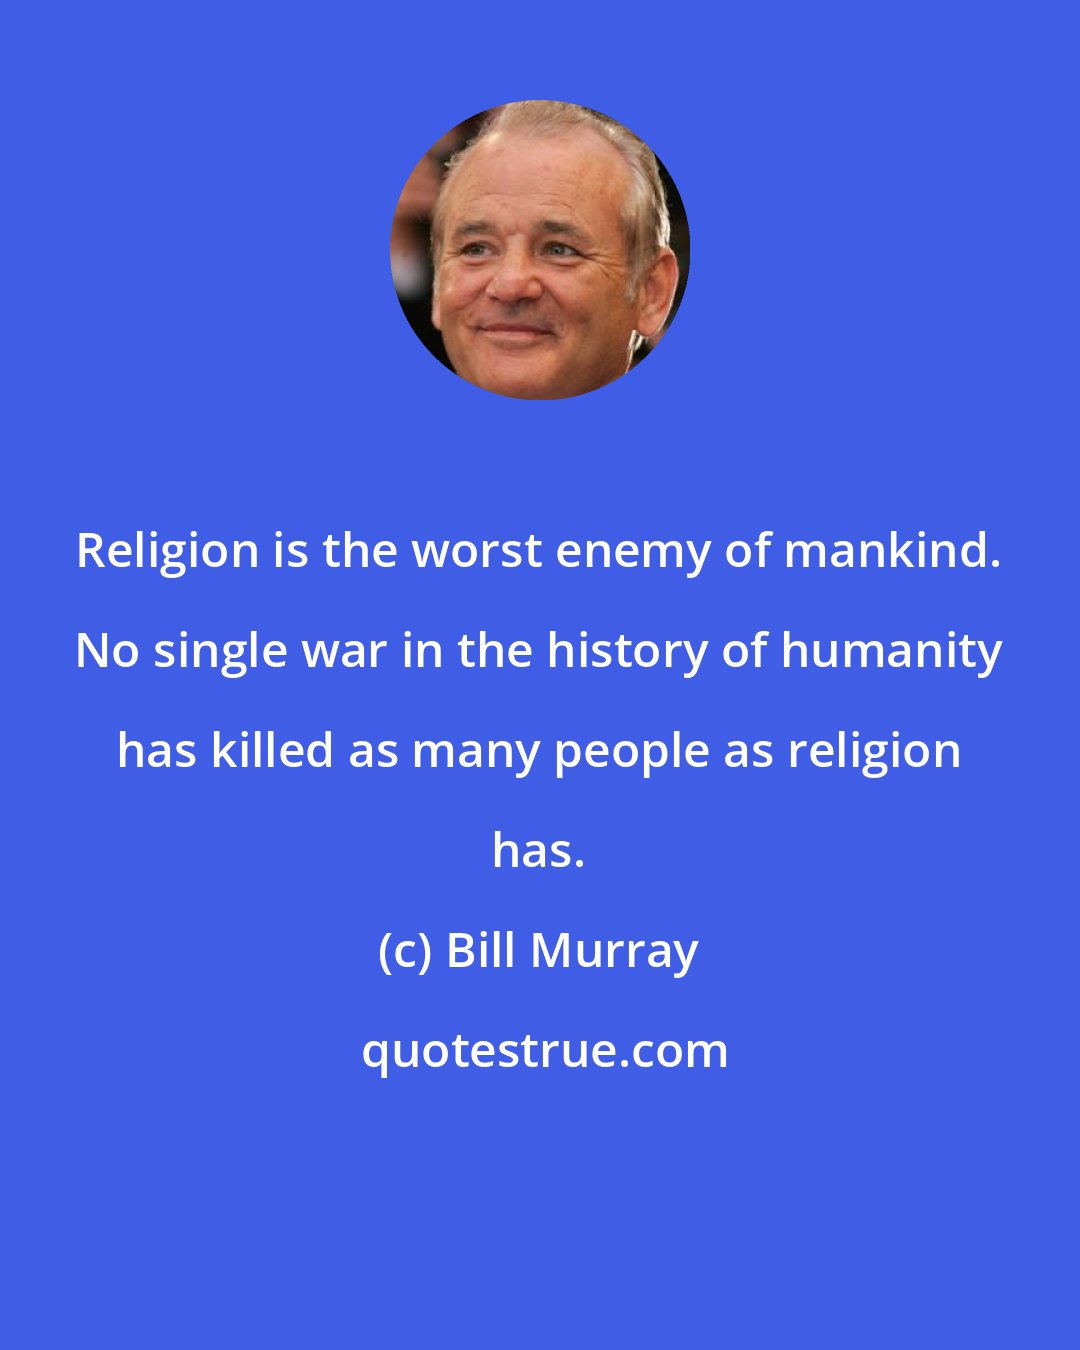 Bill Murray: Religion is the worst enemy of mankind. No single war in the history of humanity has killed as many people as religion has.